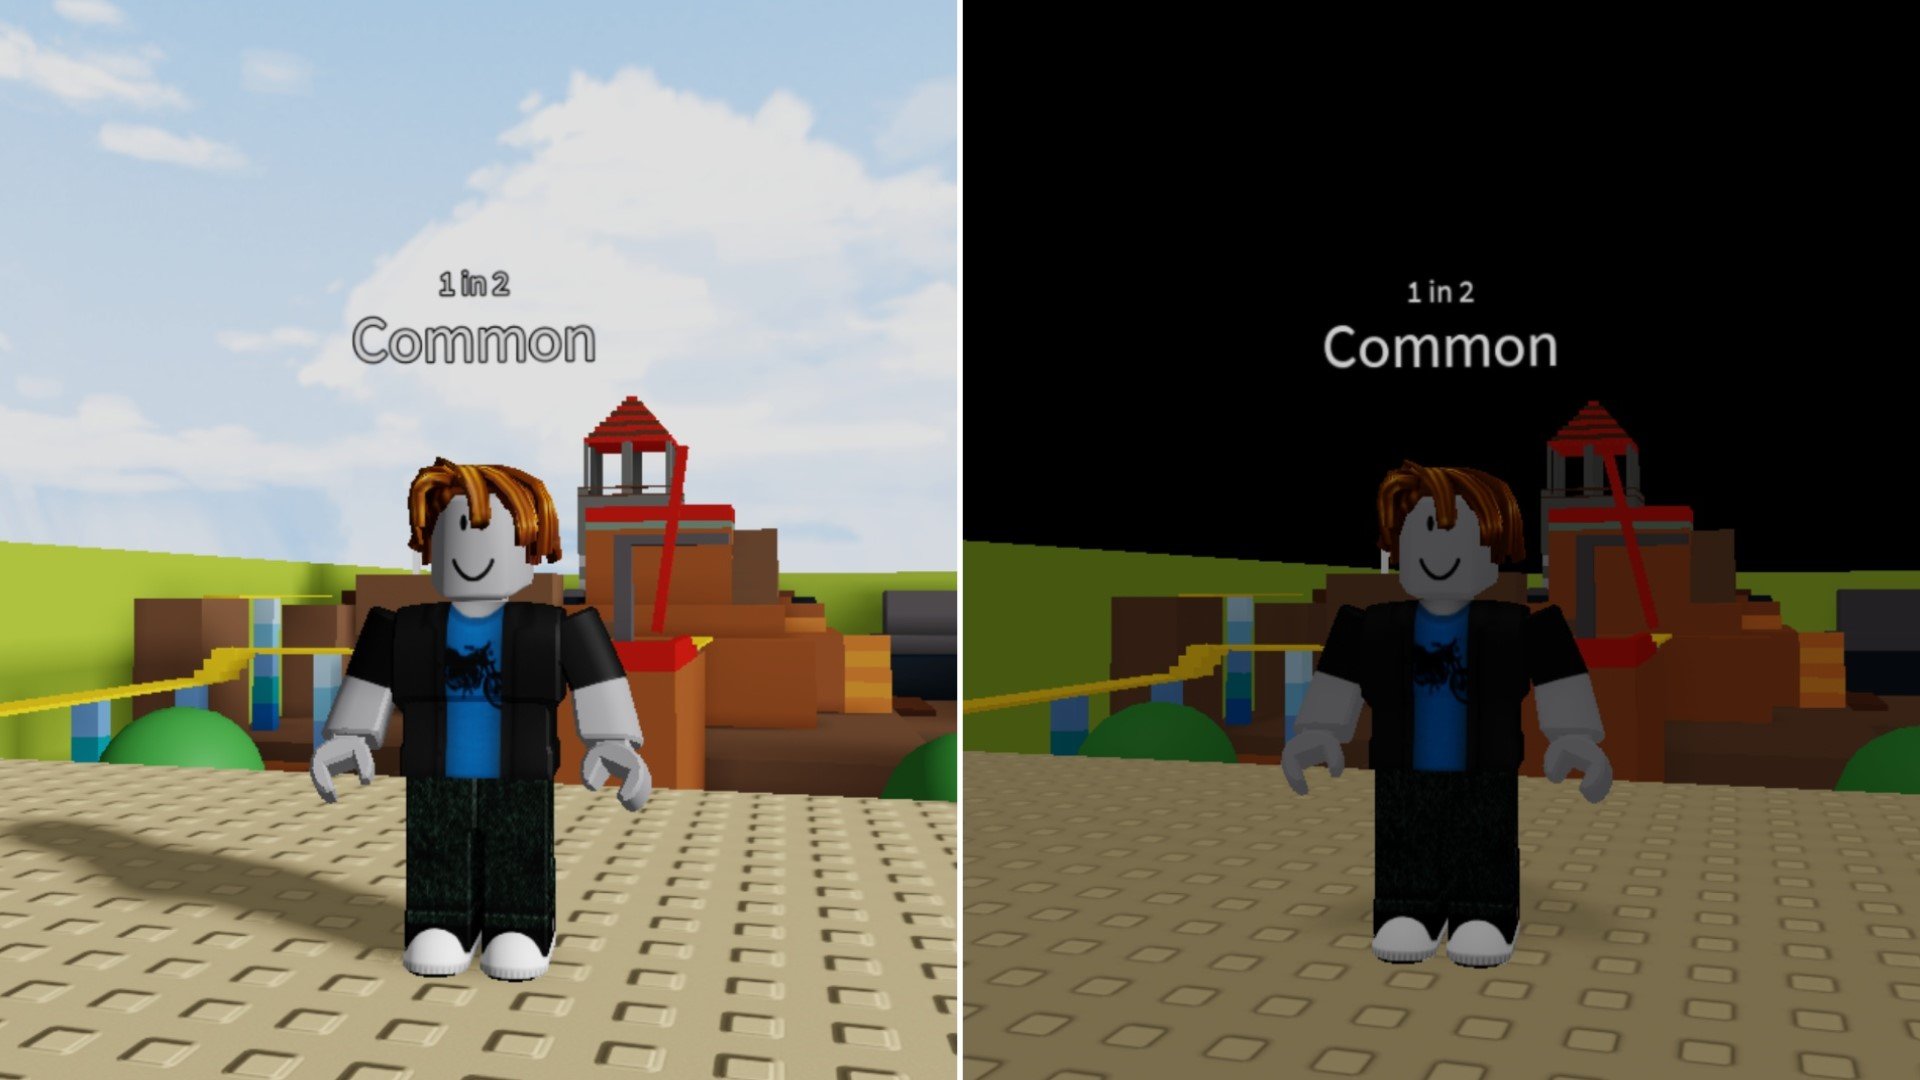 Two images of a character from Roblox game Hades RNG. The images show the same scene at both Day and Night time in-game.